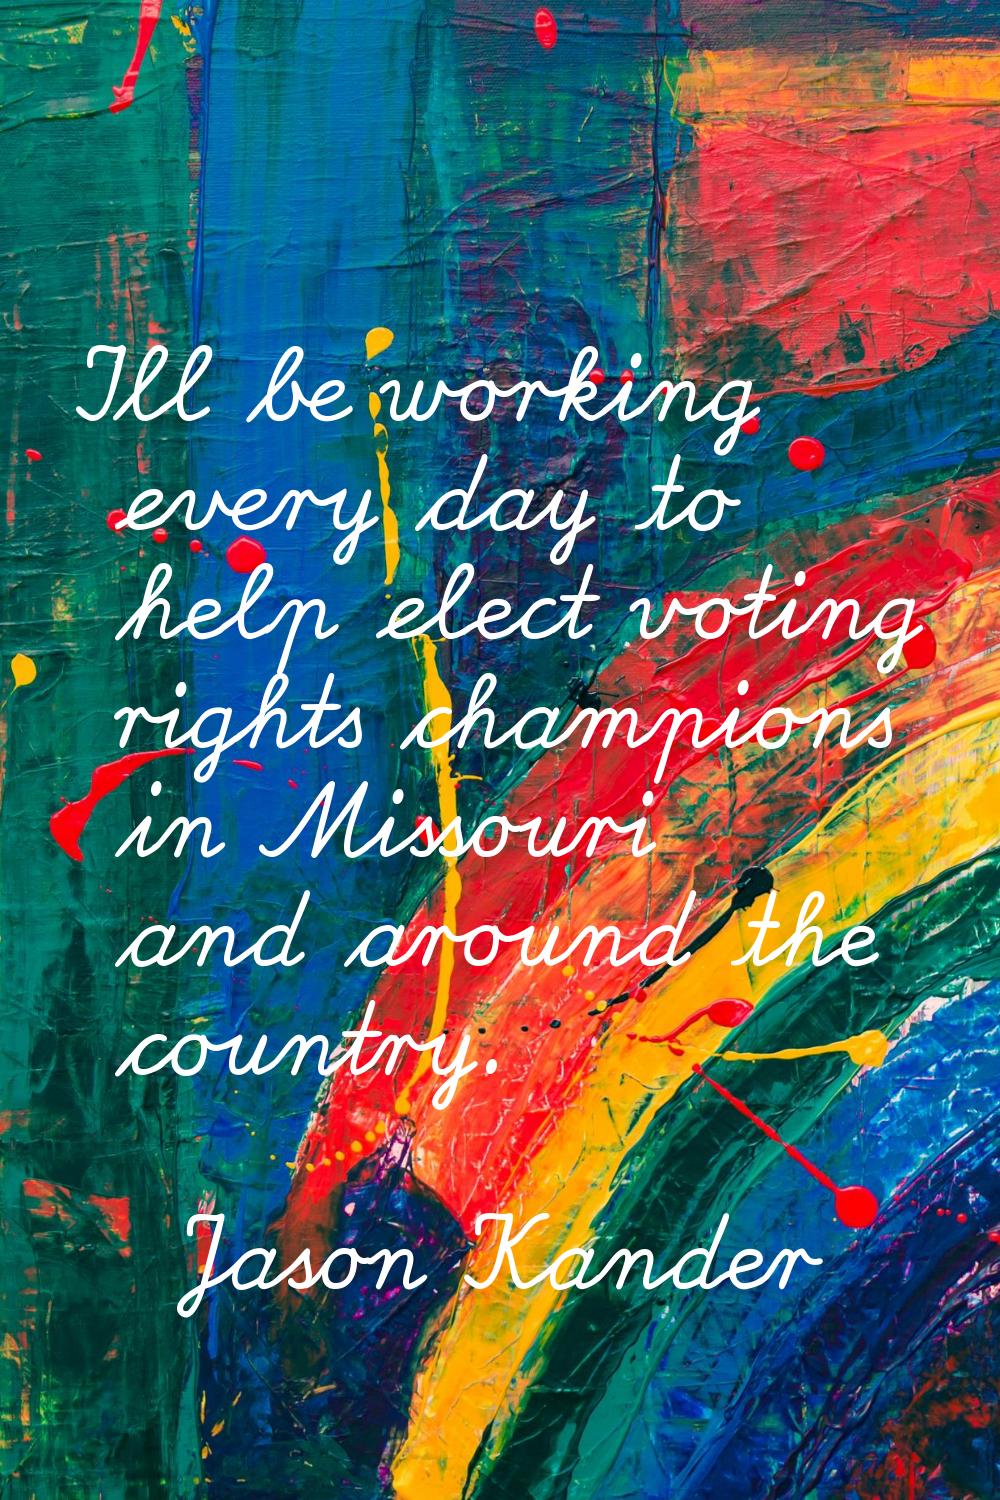 I'll be working every day to help elect voting rights champions in Missouri and around the country.